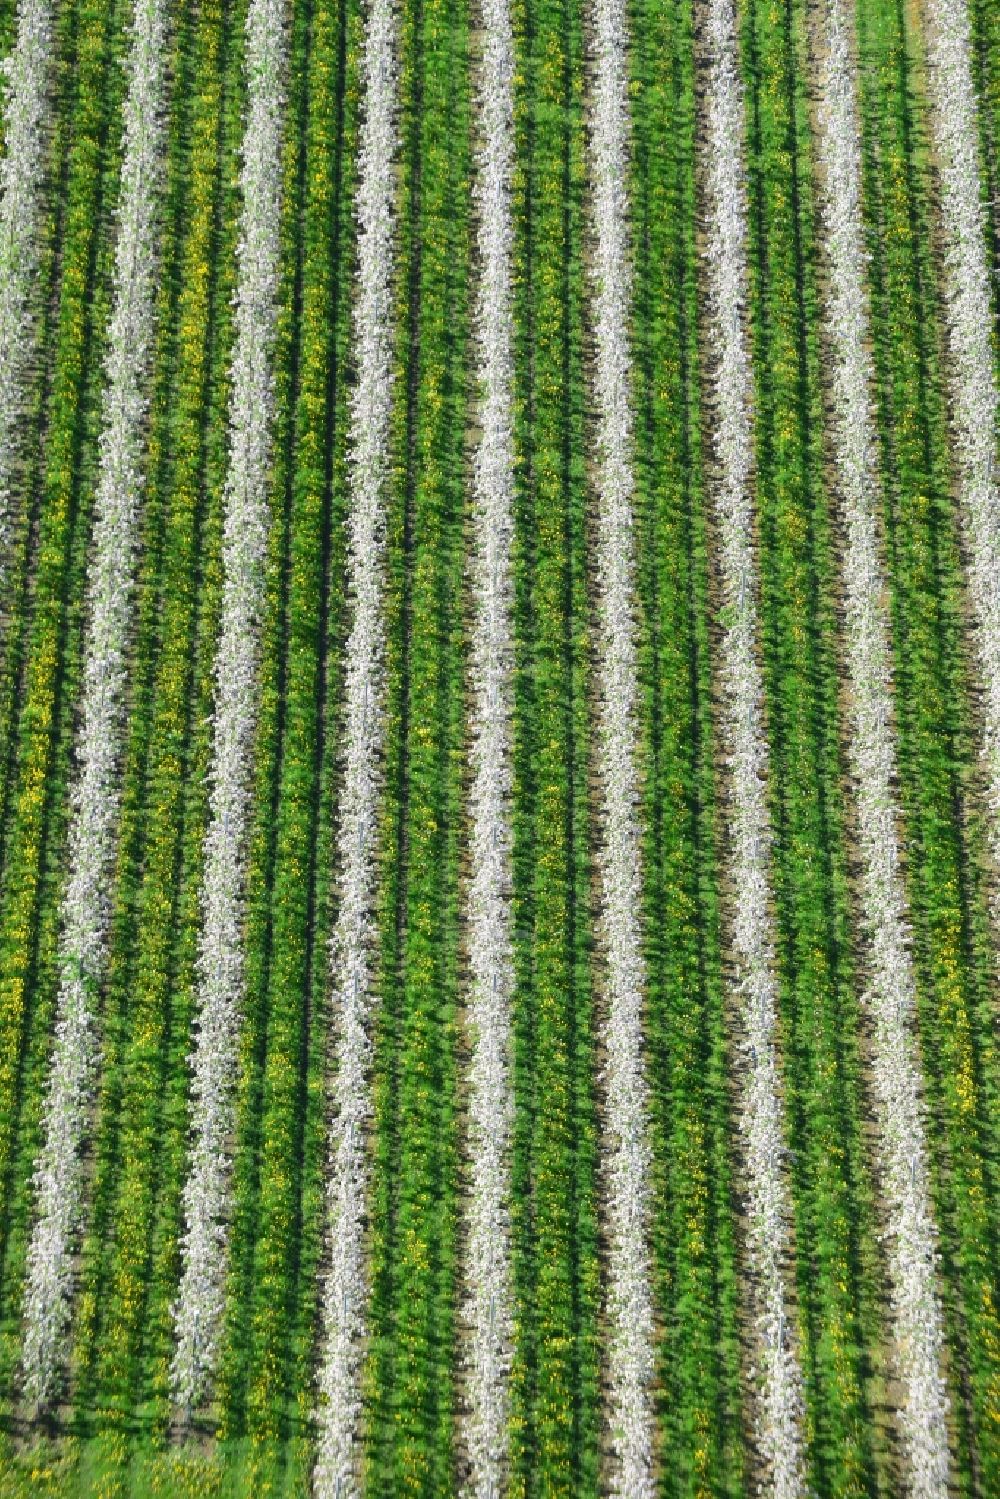 Aerial image Hirschfelde - Structures of fruit tree rows with spring apple blossoms on agricultural fields in Hirschfelde in Brandenburg